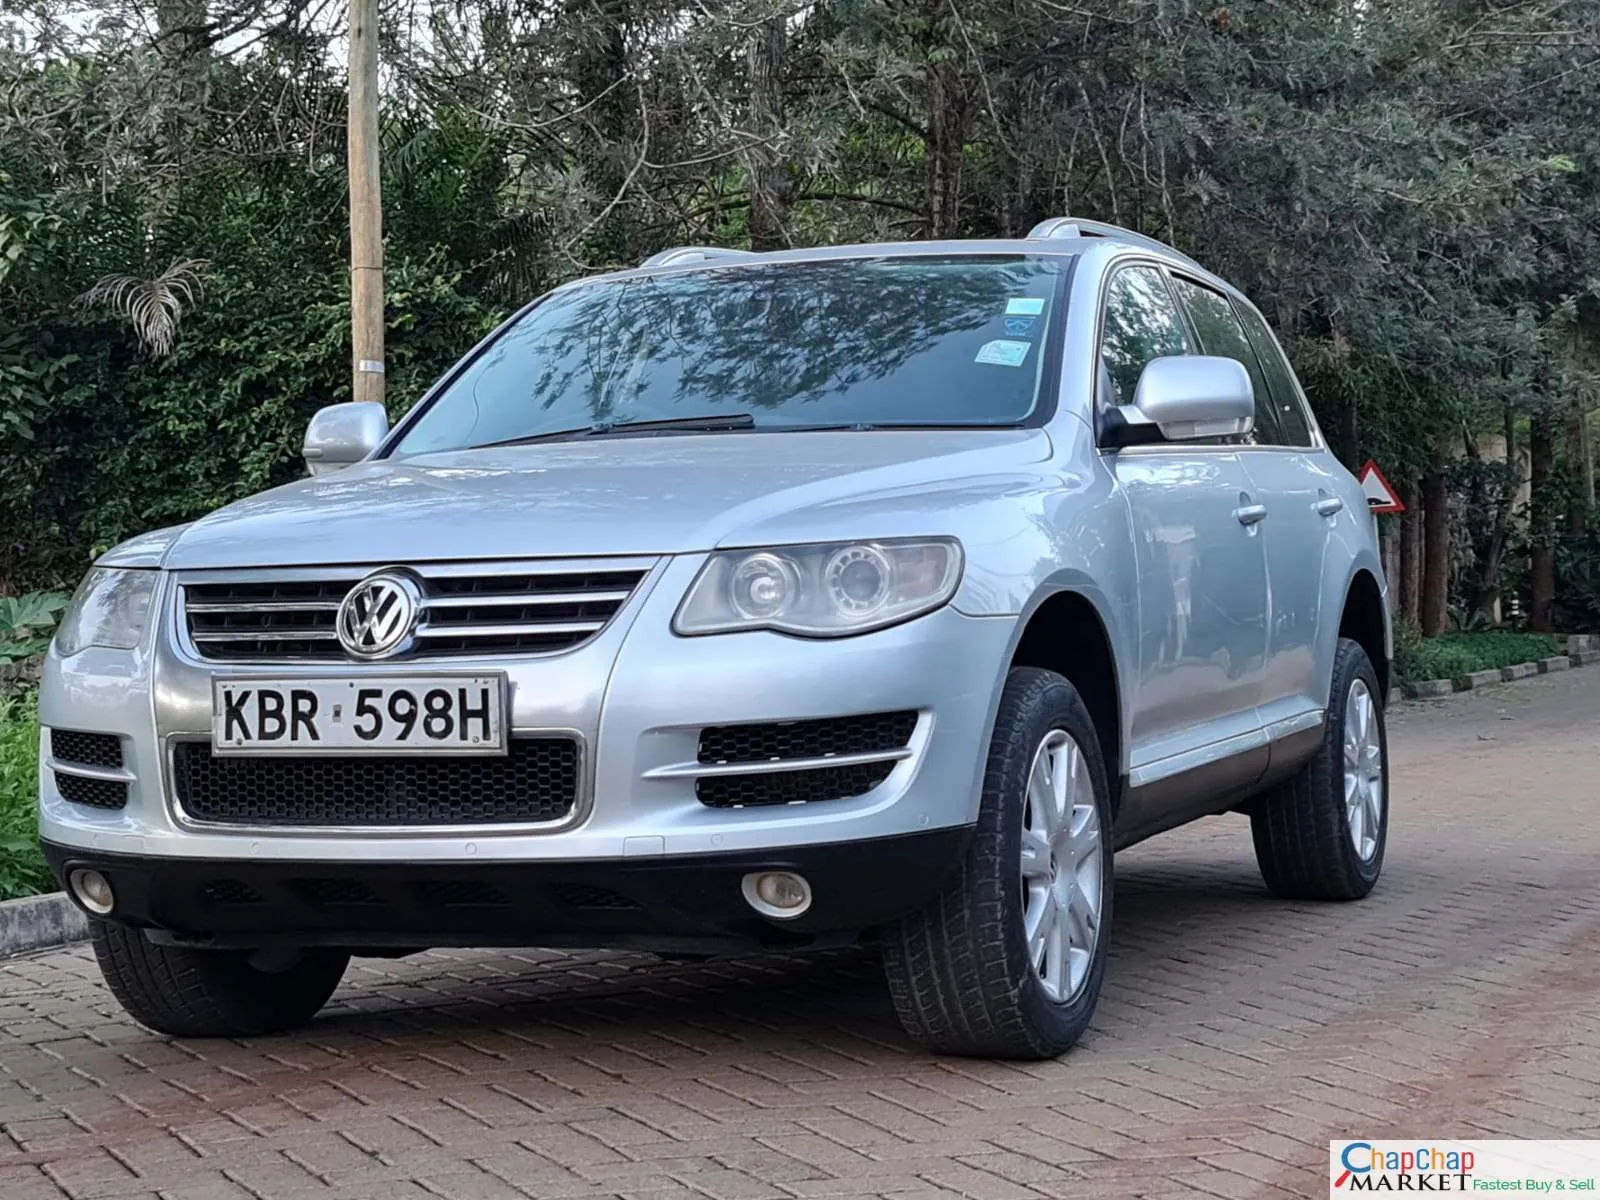 Cars Cars For Sale/Vehicles-Volkswagen VW Touareg 🔥 You Pay 30% Deposit Trade in Ok EXCLUSIVE 9